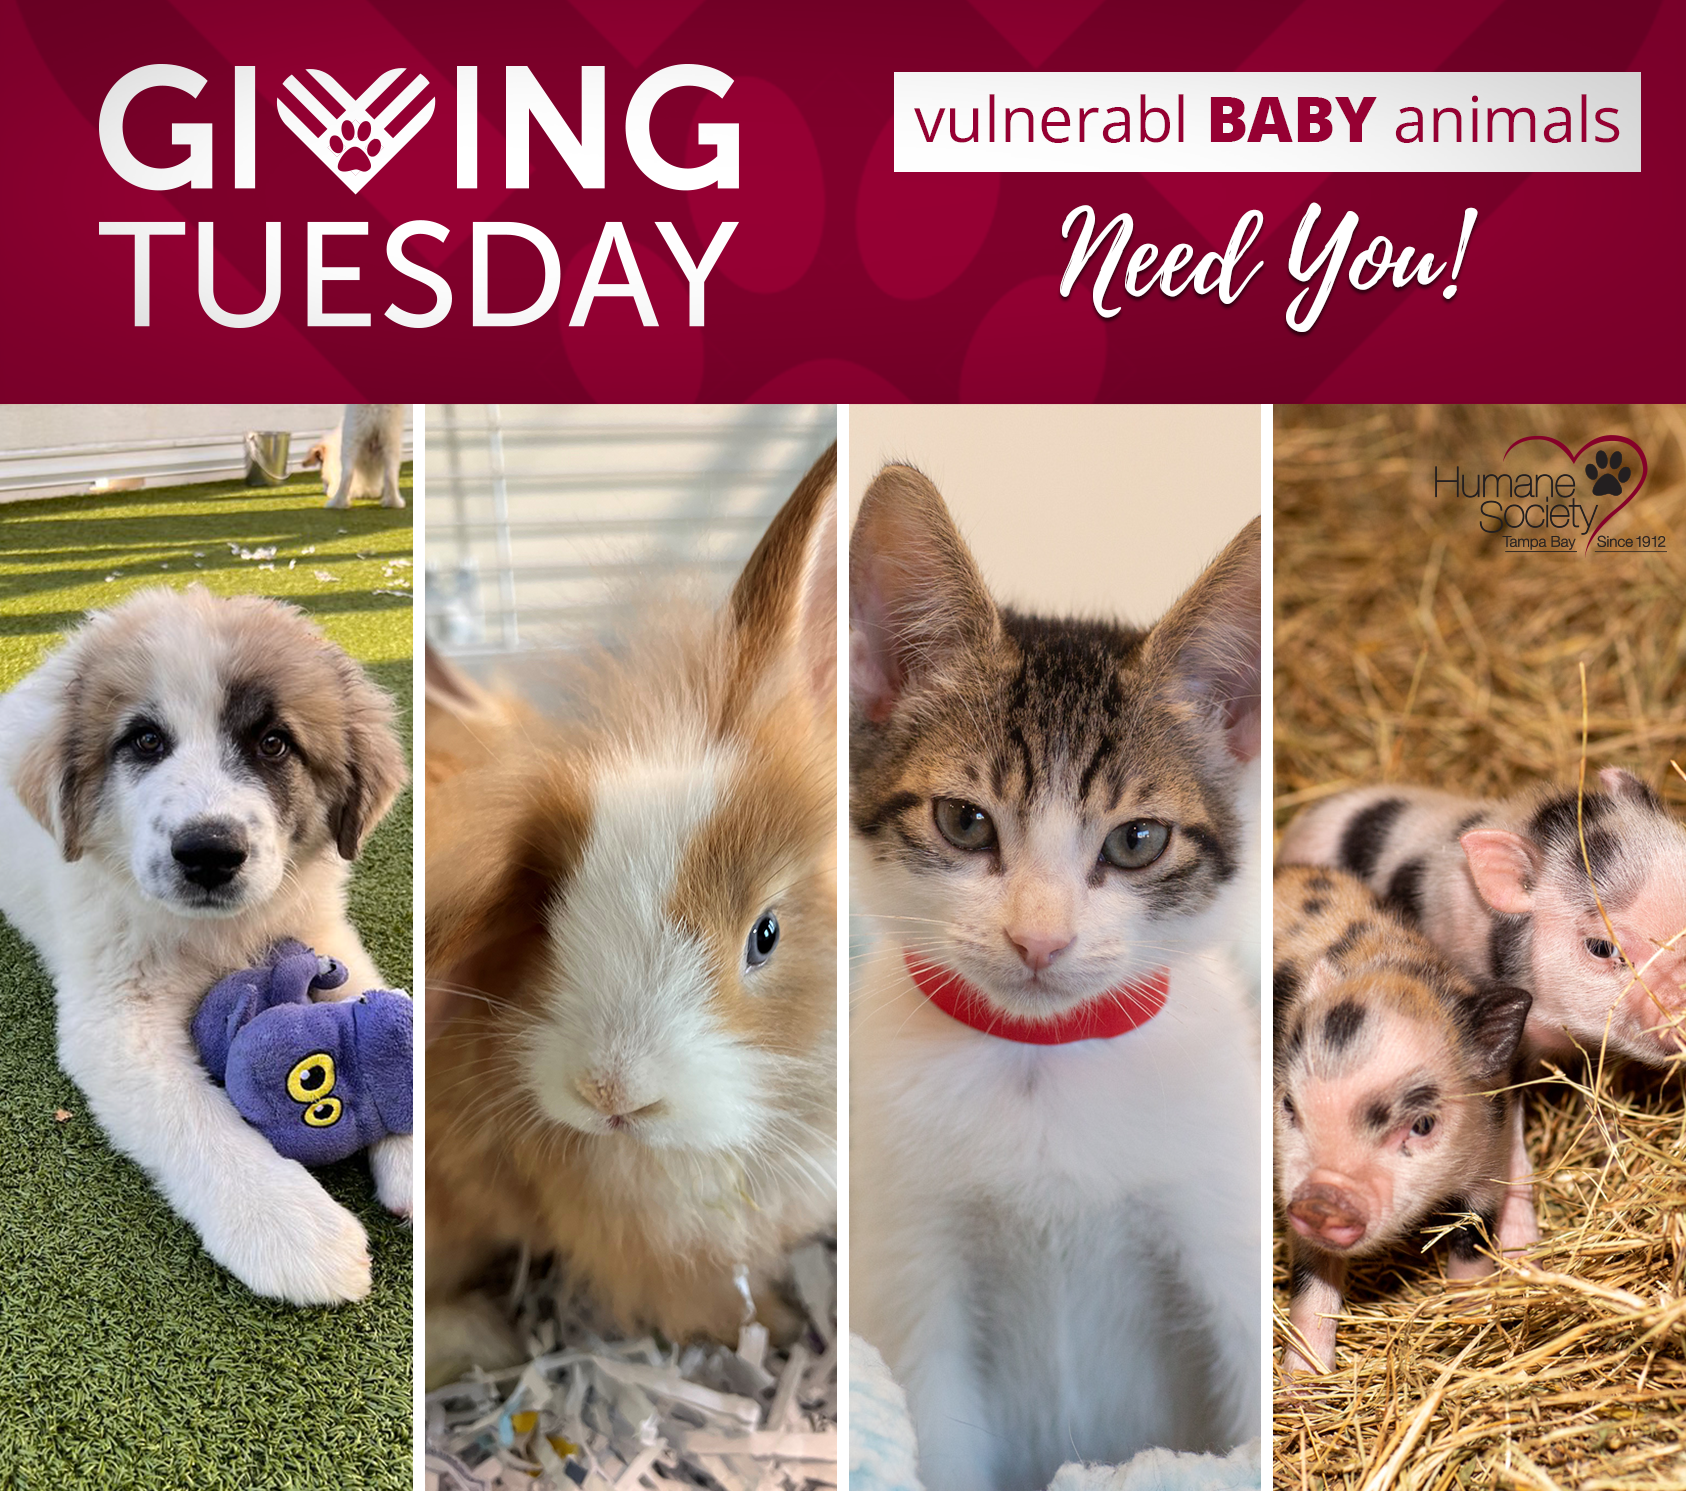 Giving Tuesday, Baby animals need you